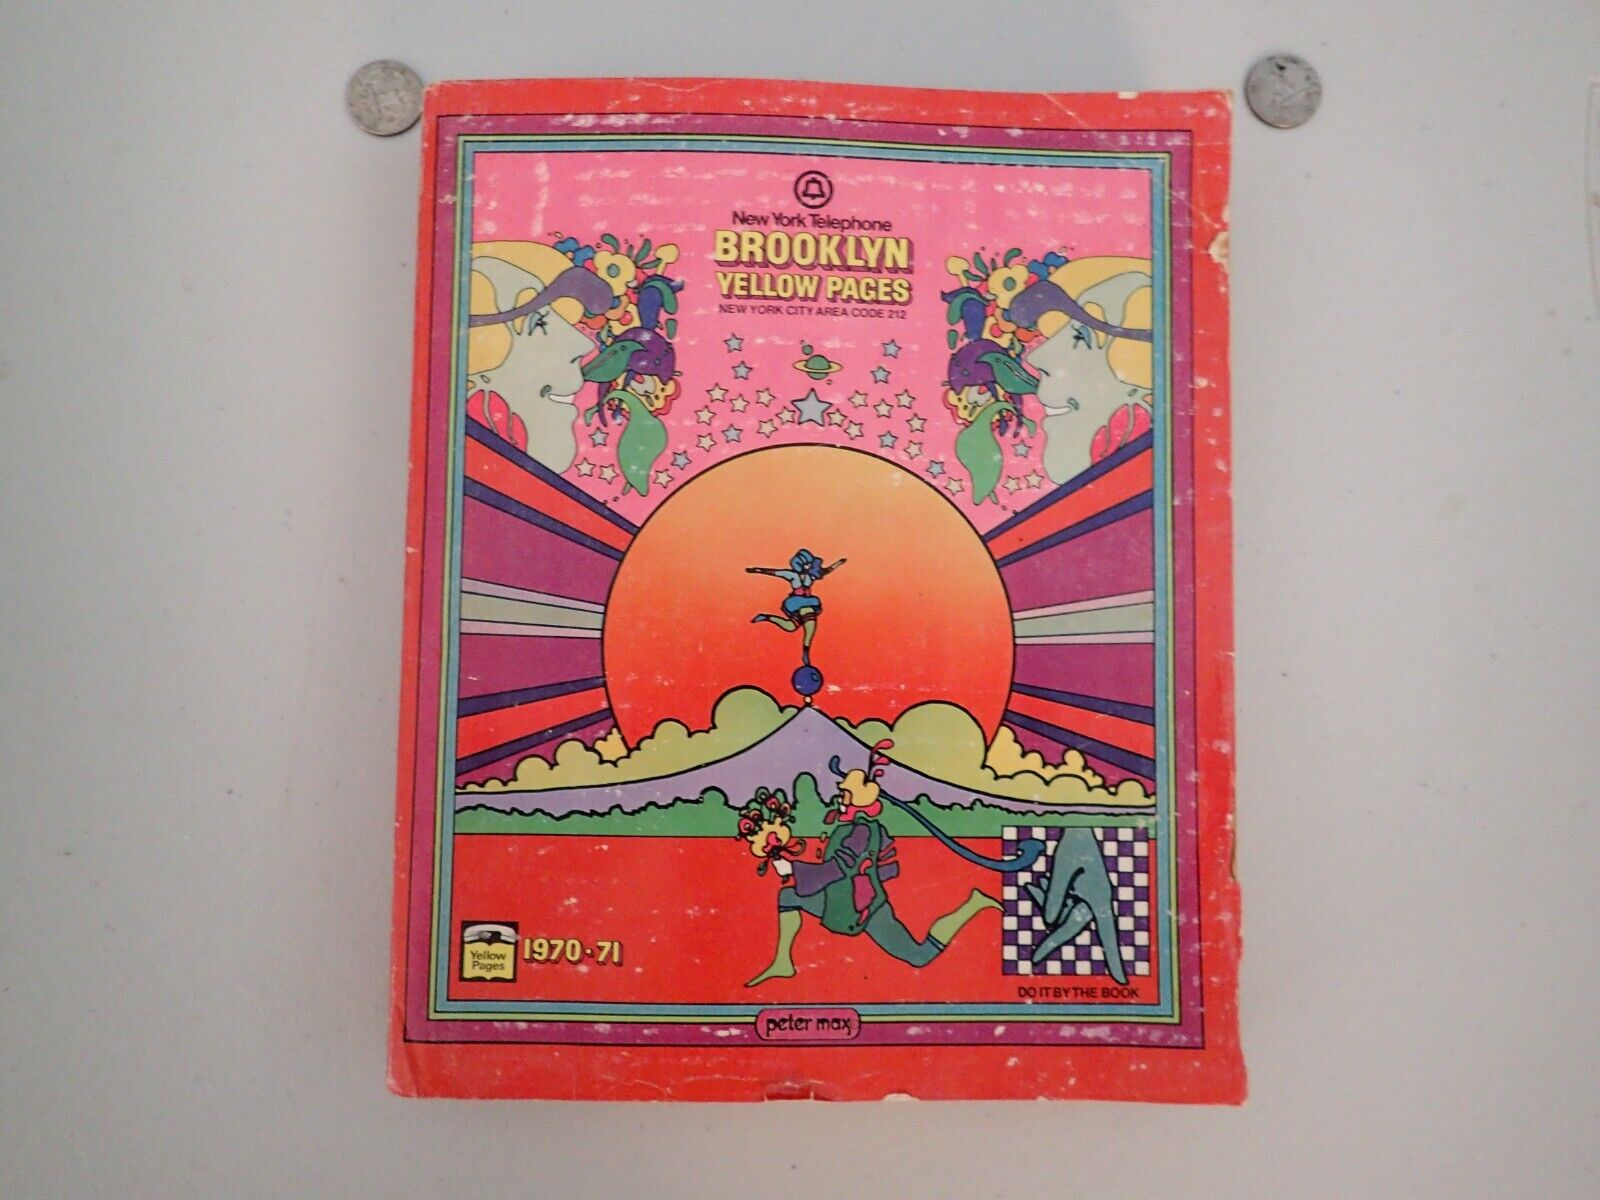 Brooklyn yellow pages Peter Max EARLY cover art RARE book 1970 - 71 Beatles 